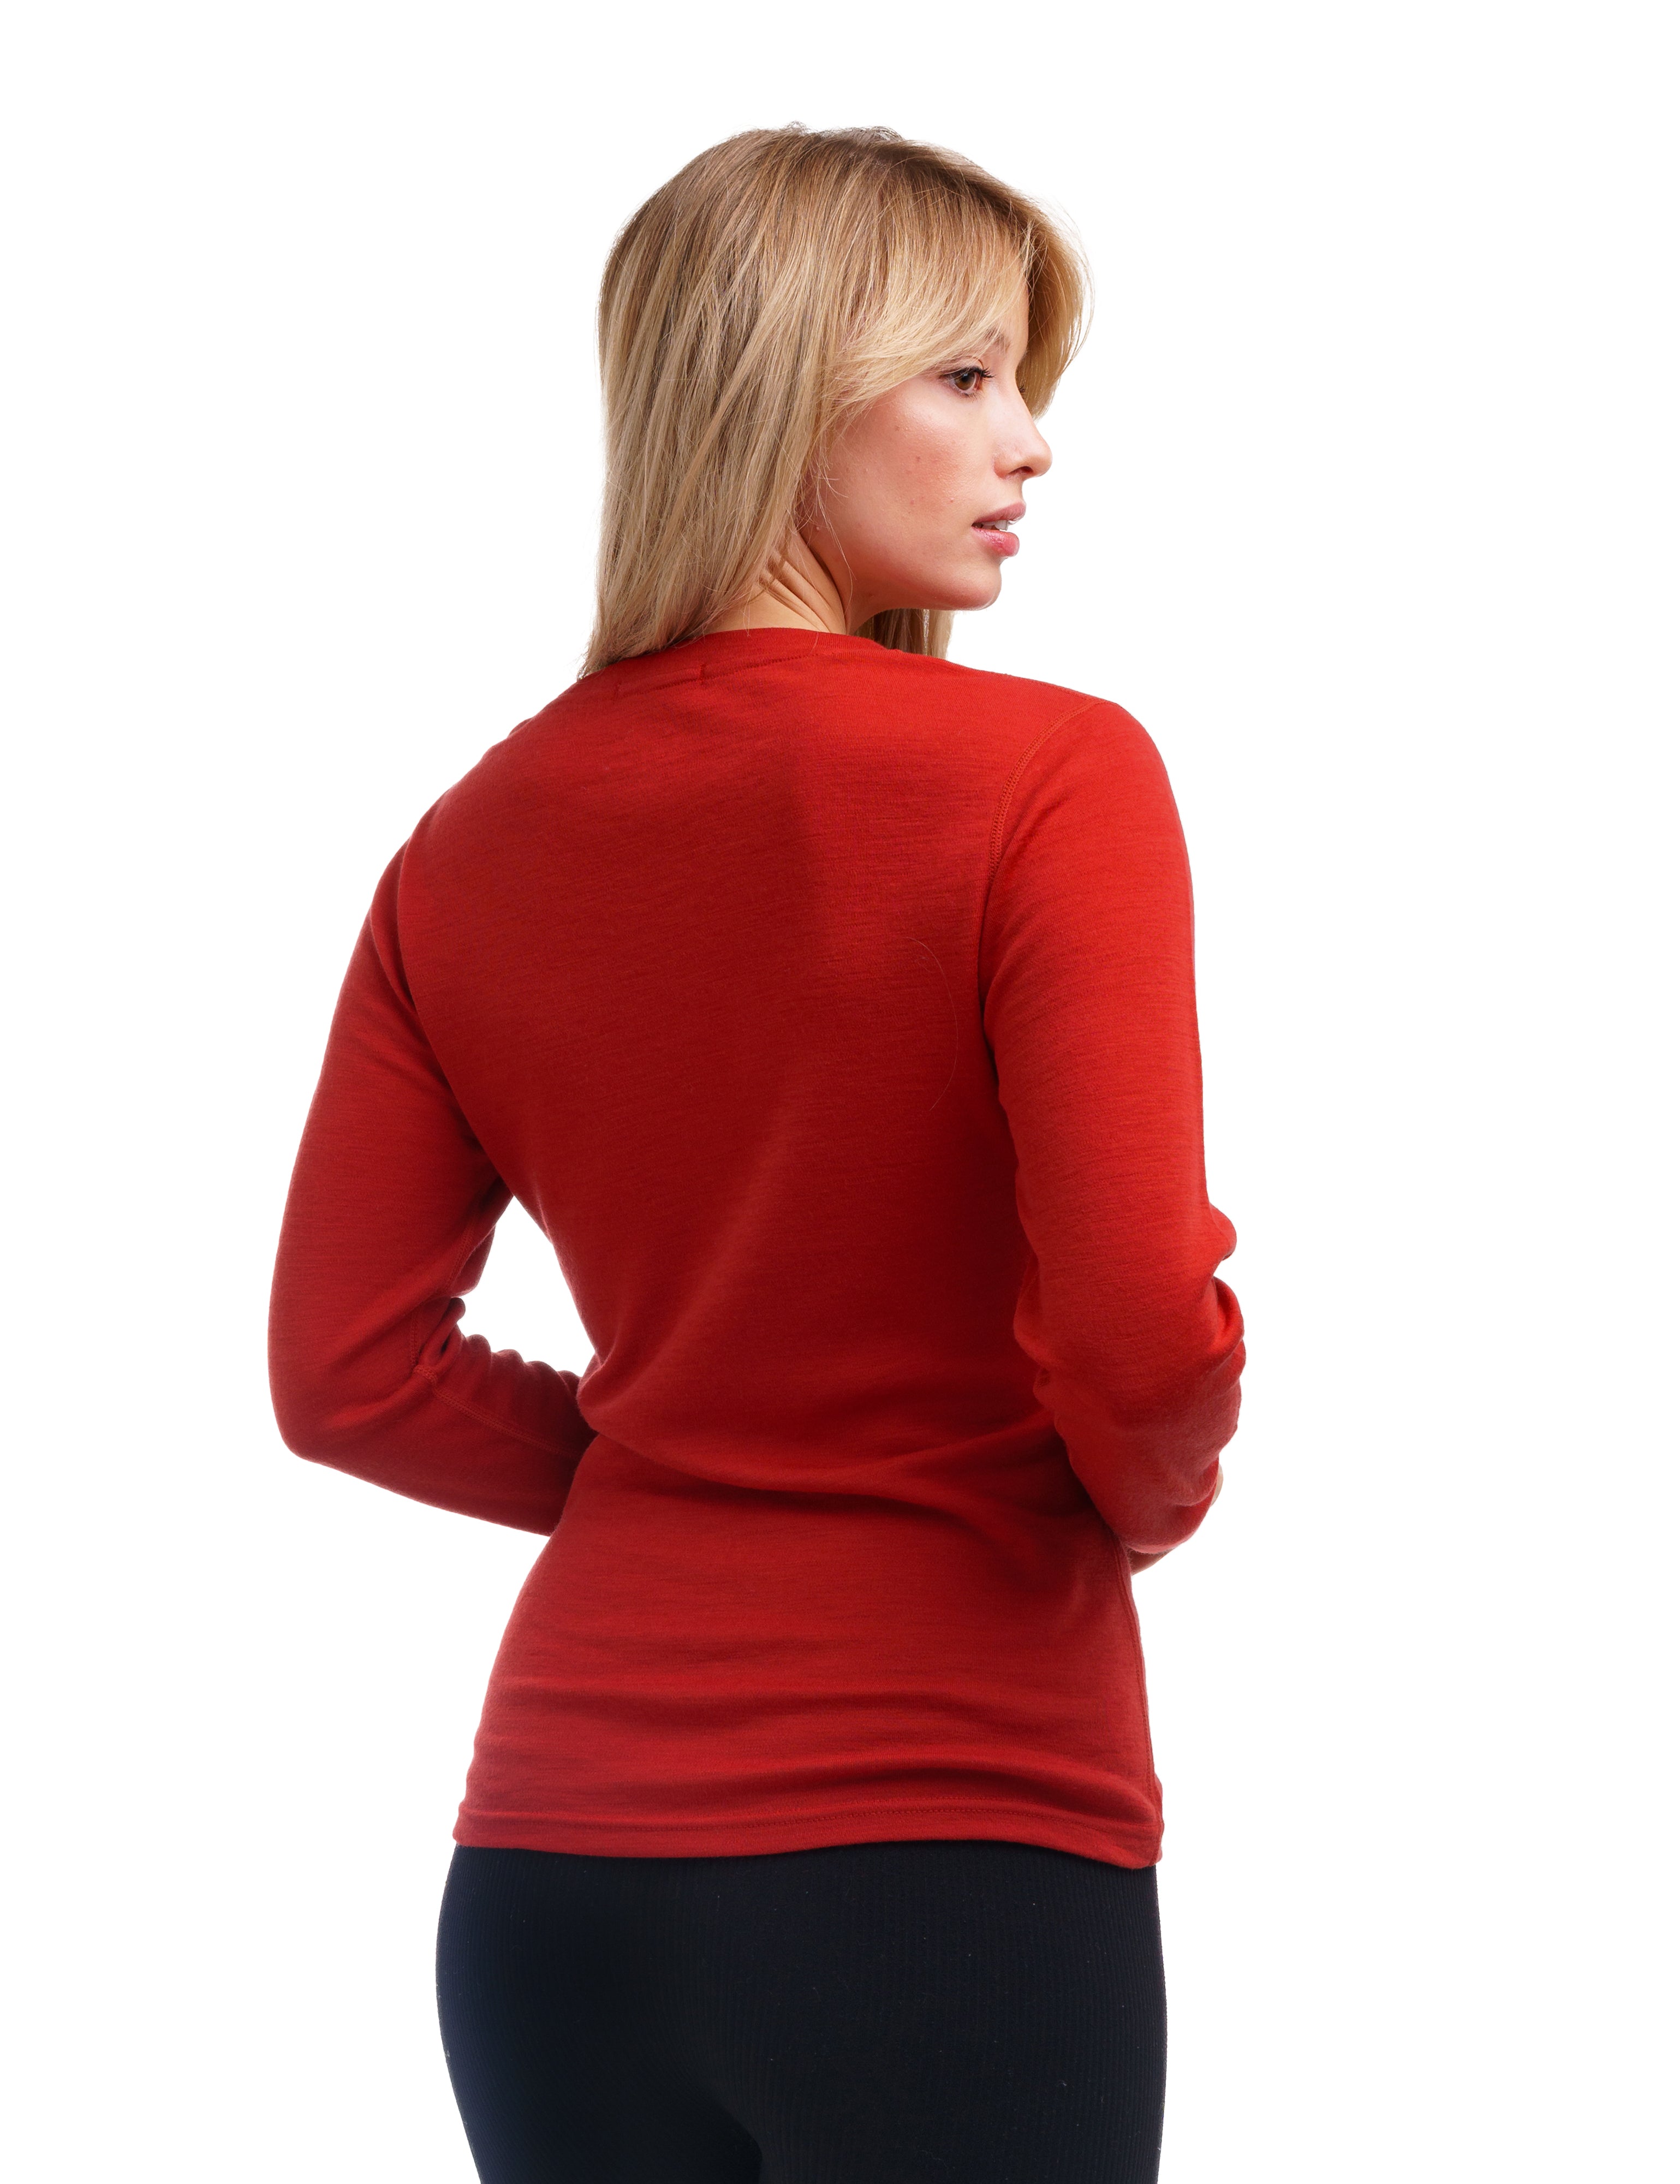 Merino Wool Long Sleeve (Cherry Red) Thermal Base Layer Underwear -  Midweight